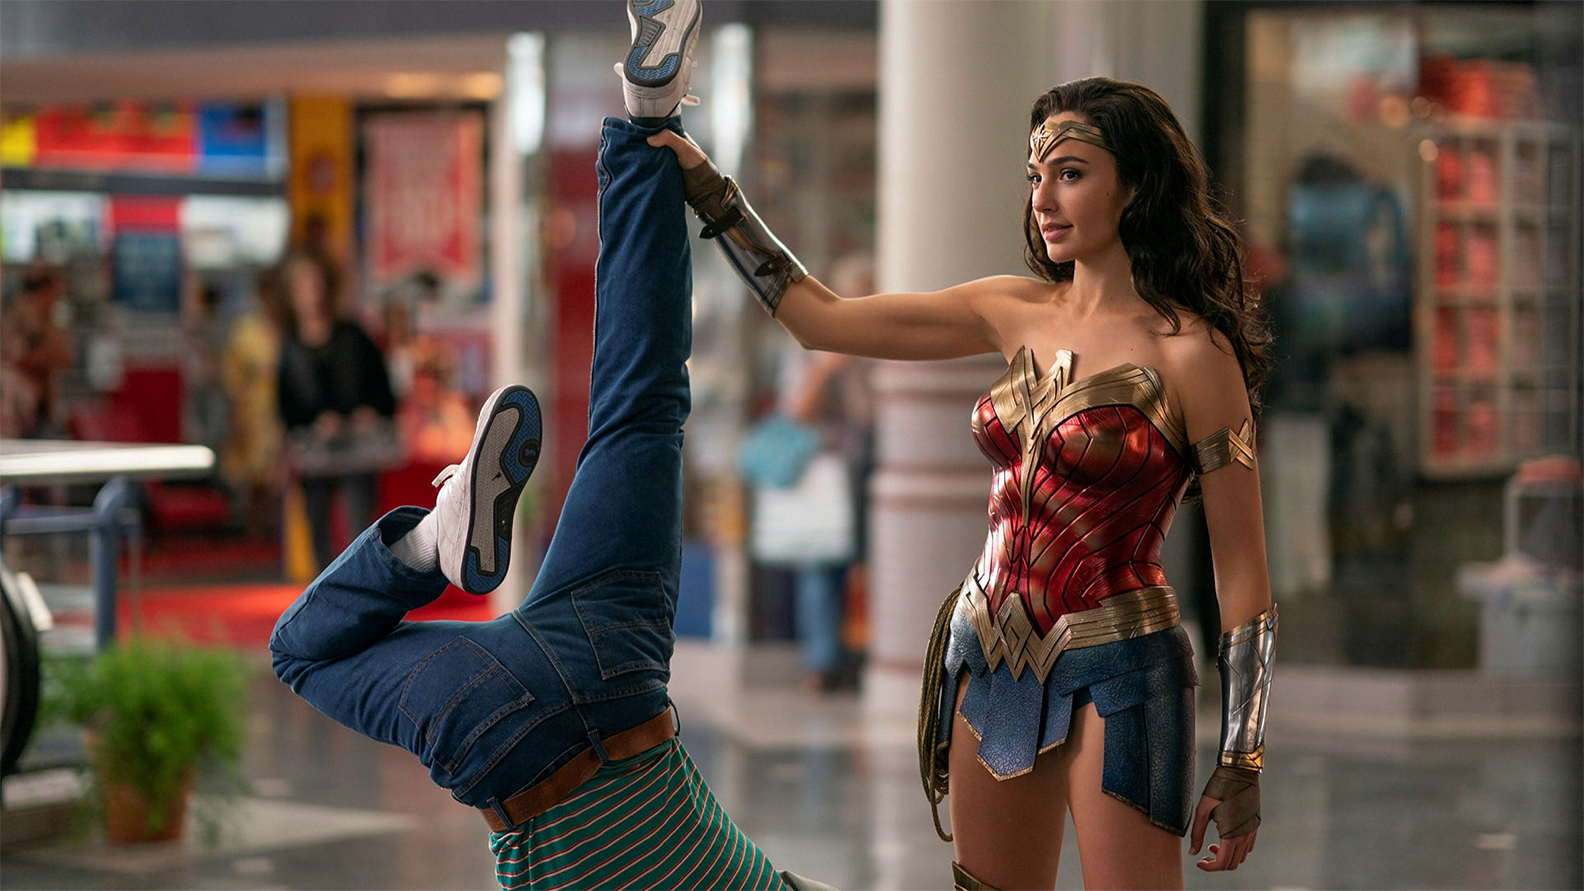 What's Next for Upcoming DC Movies? 'Wonder Woman' Canceled